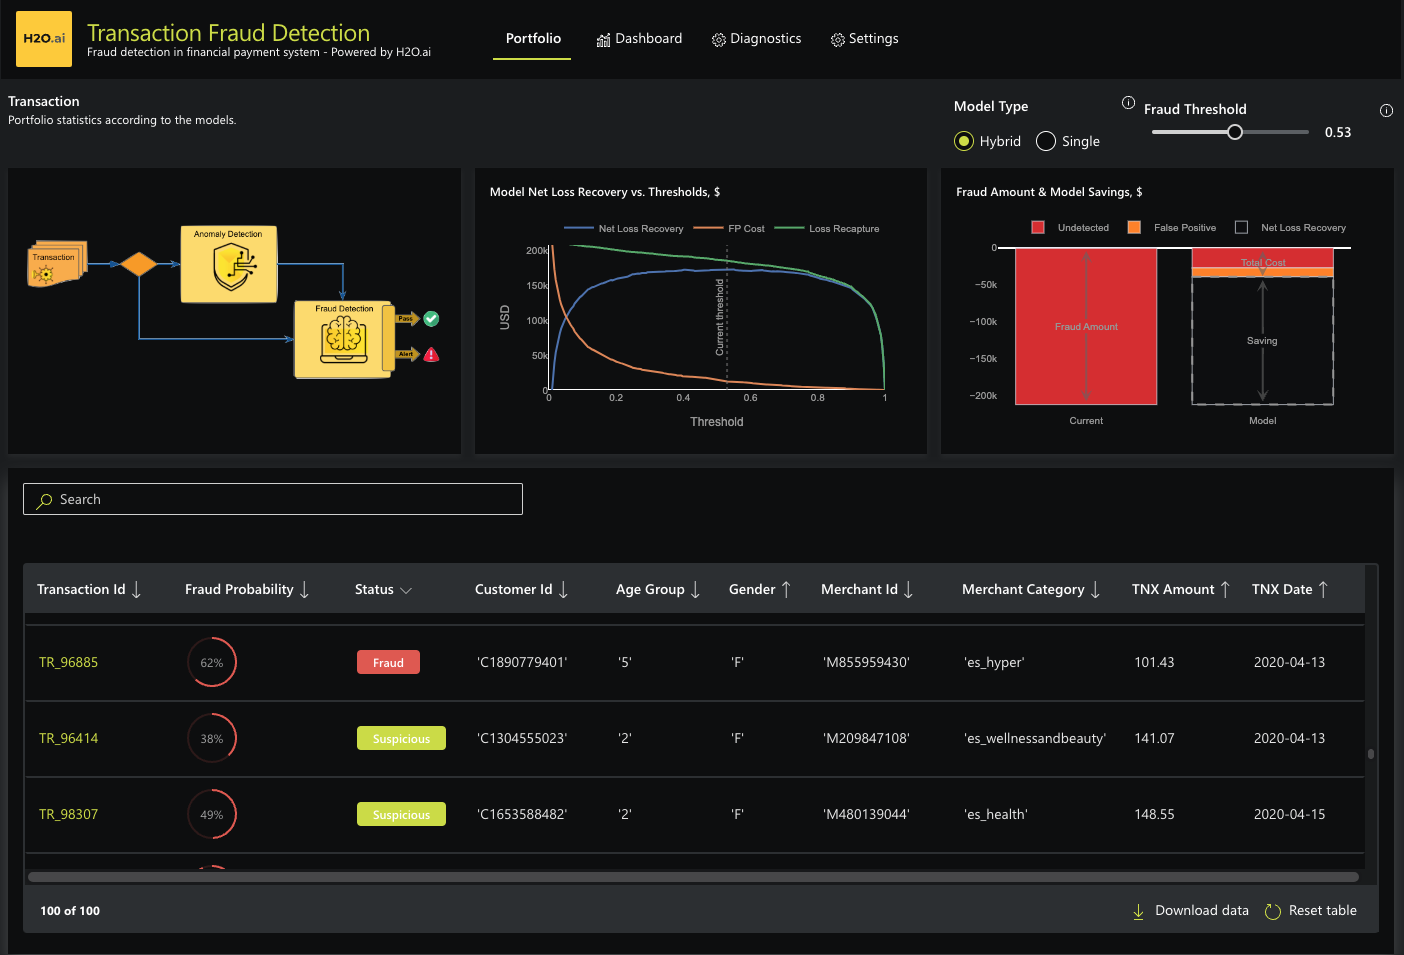 Screenshot of the H20.ai interface for fraud detection.